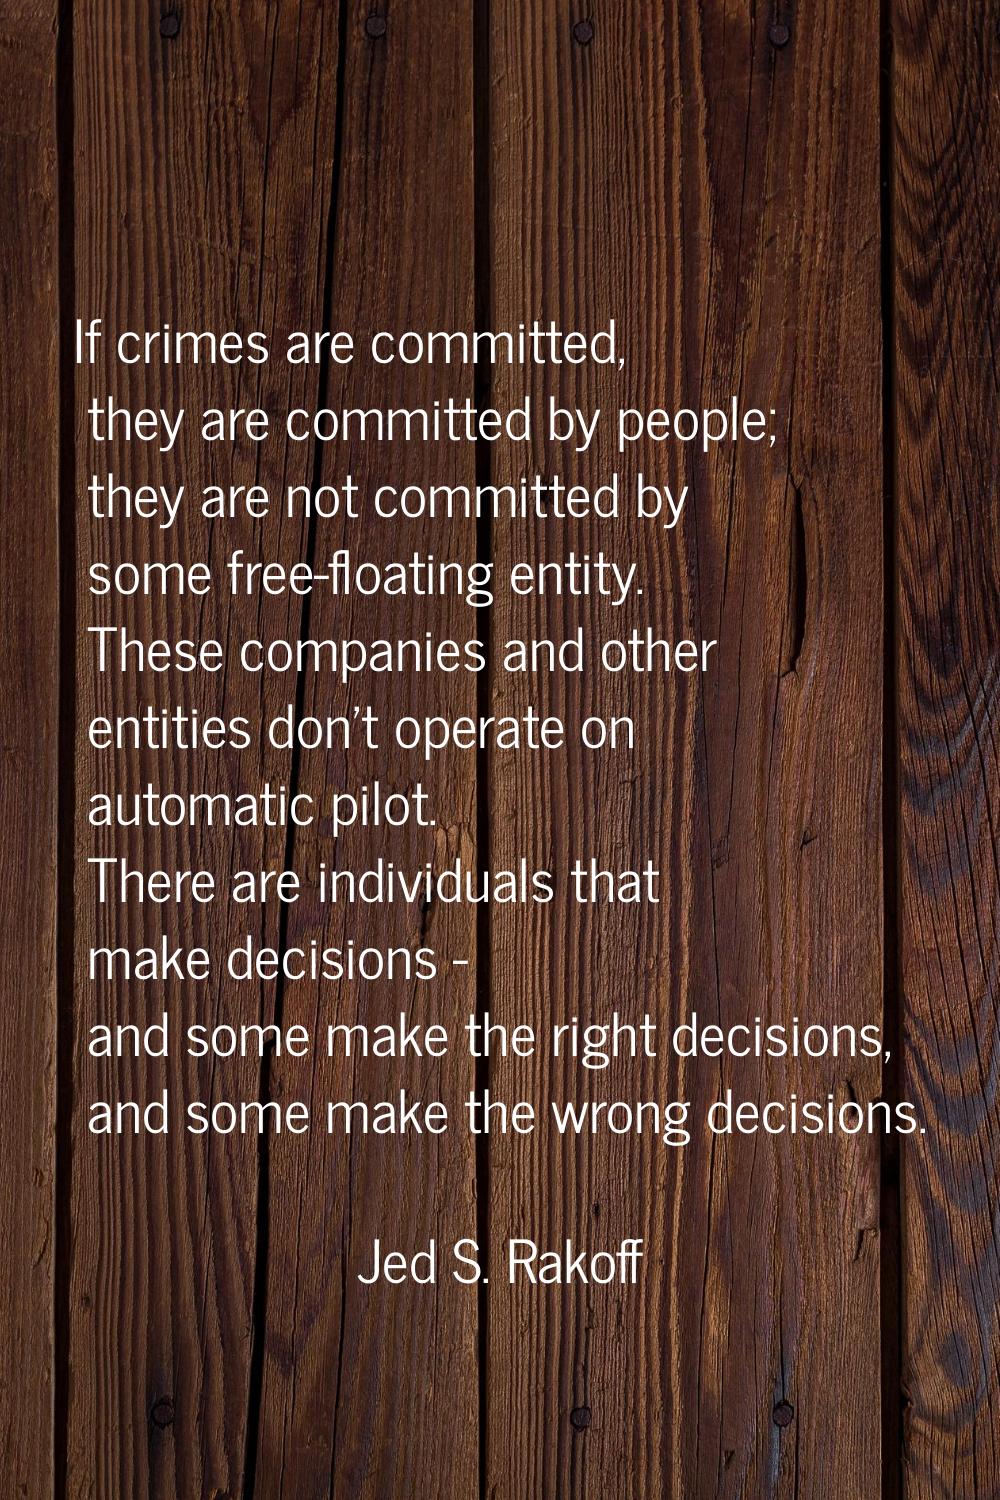 If crimes are committed, they are committed by people; they are not committed by some free-floating